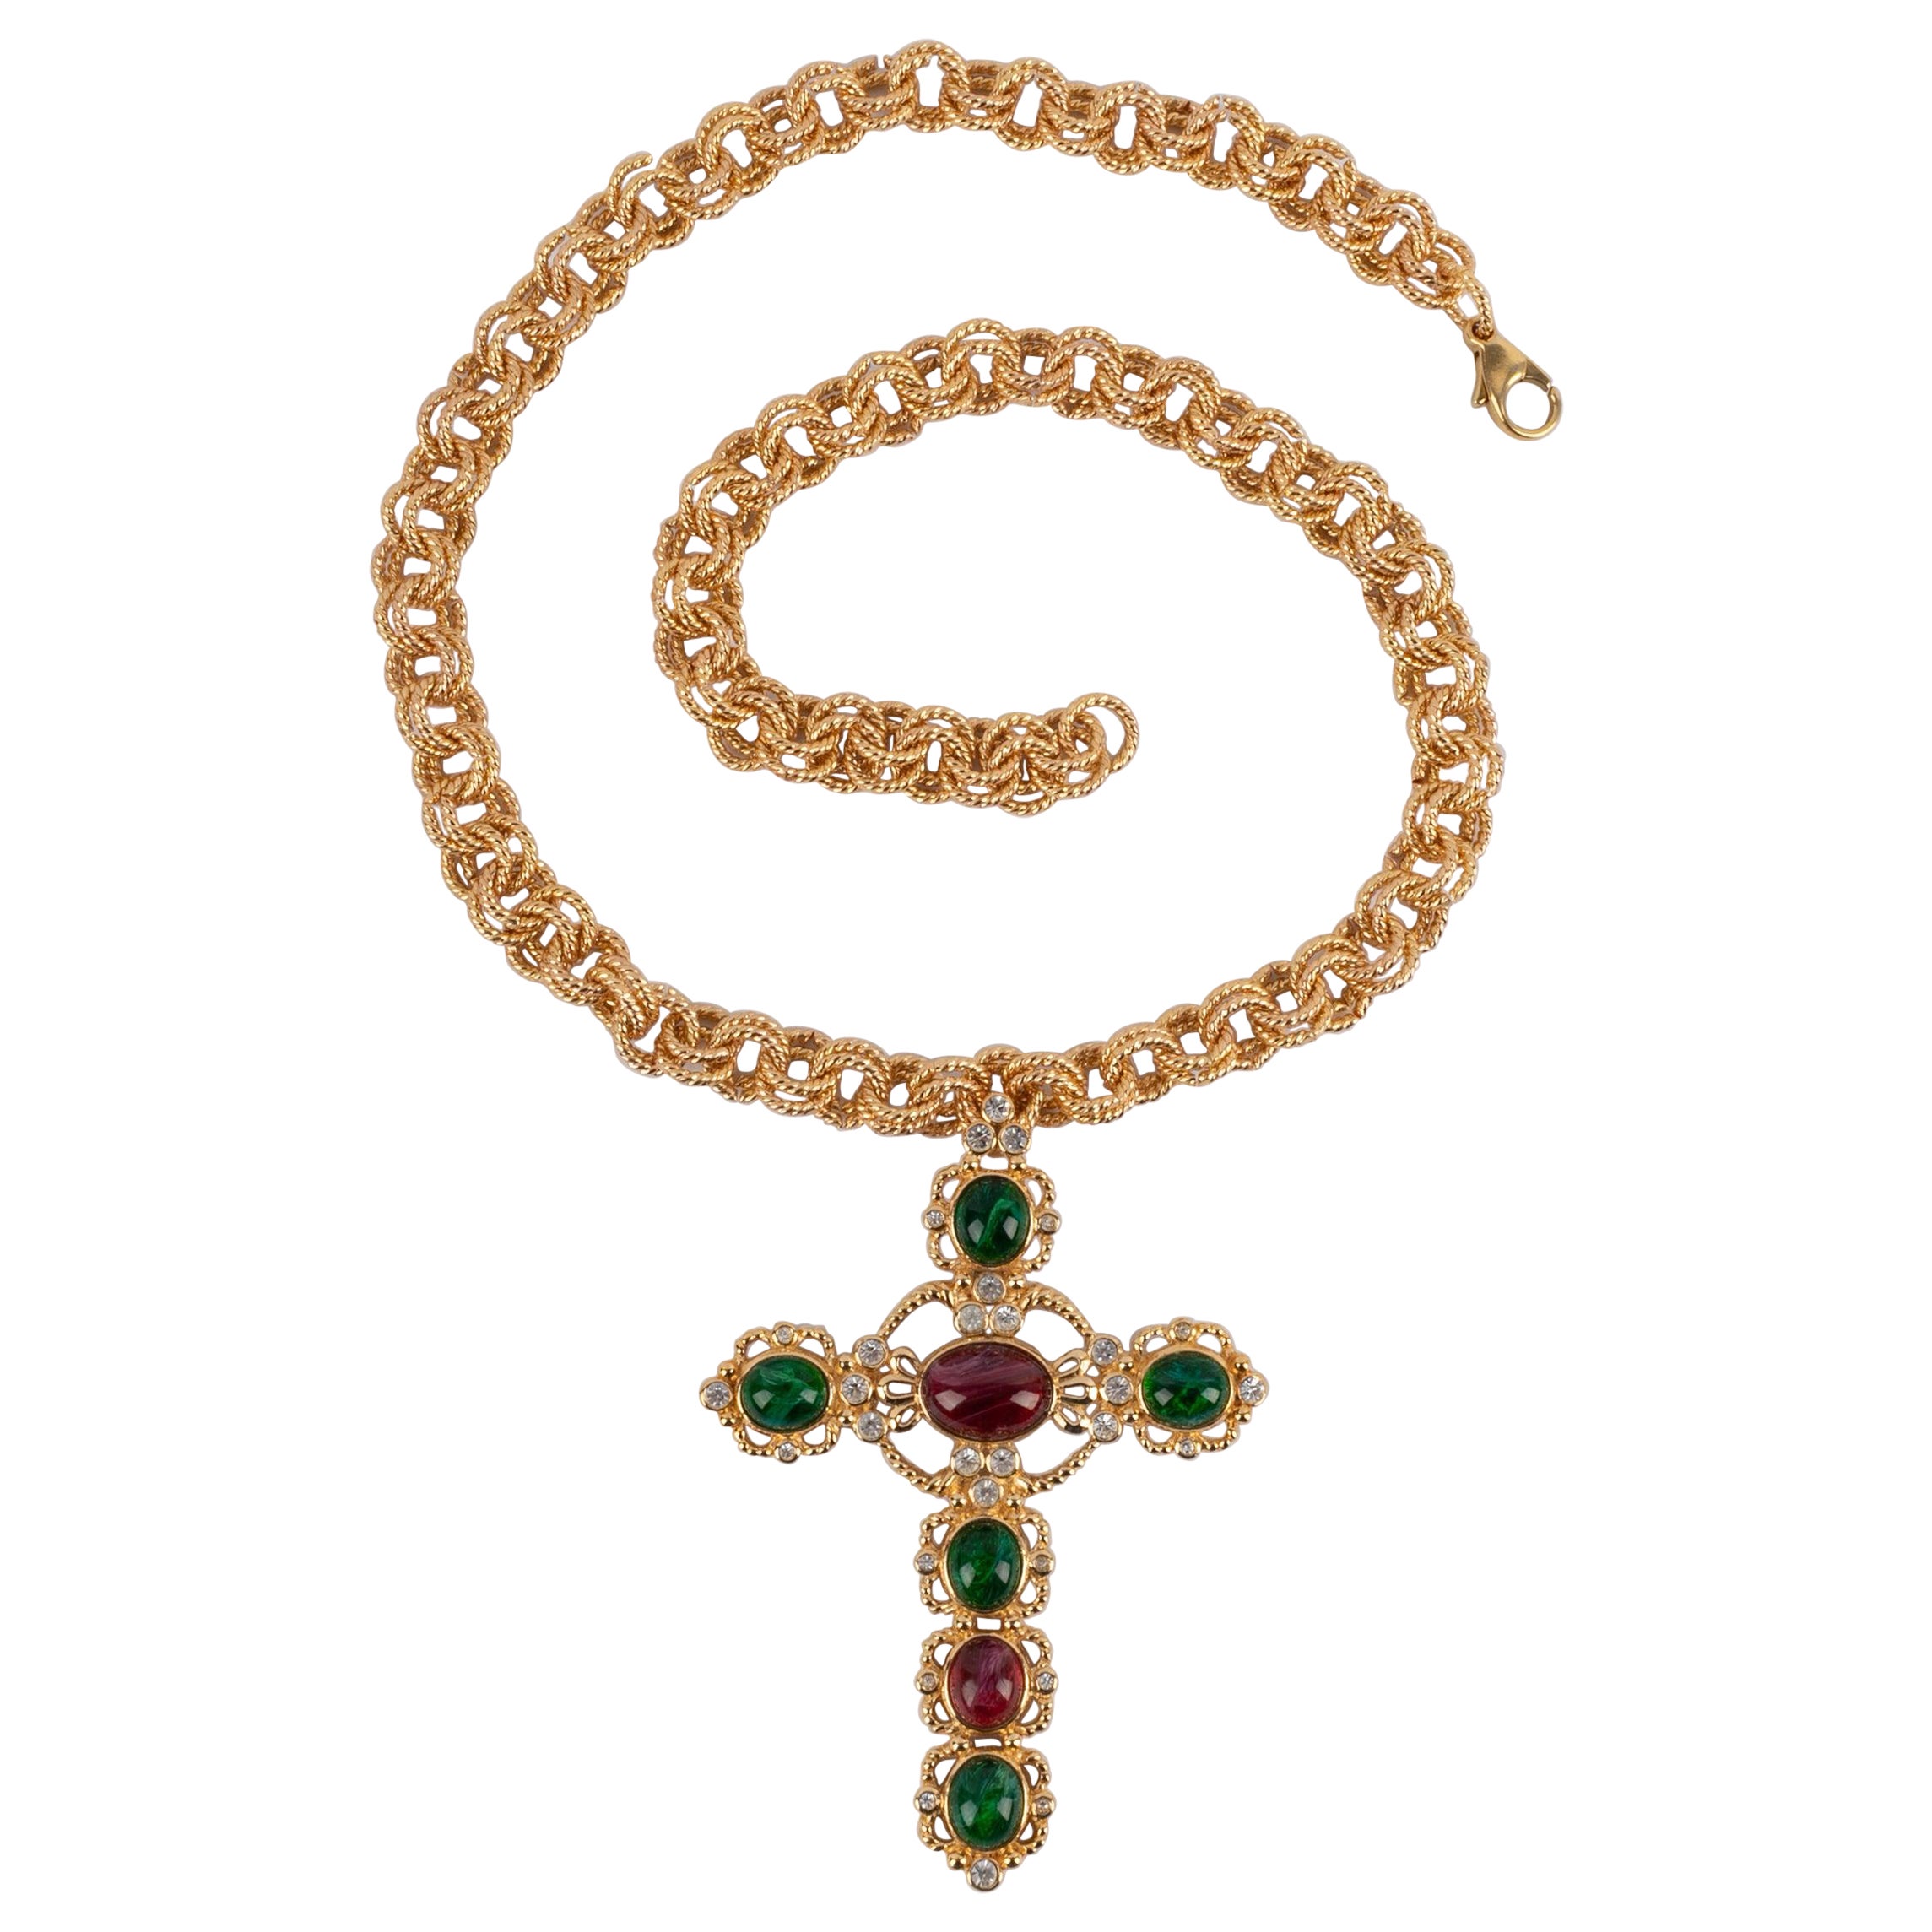 Christian Dior Golden Metal Cross Necklace For Sale